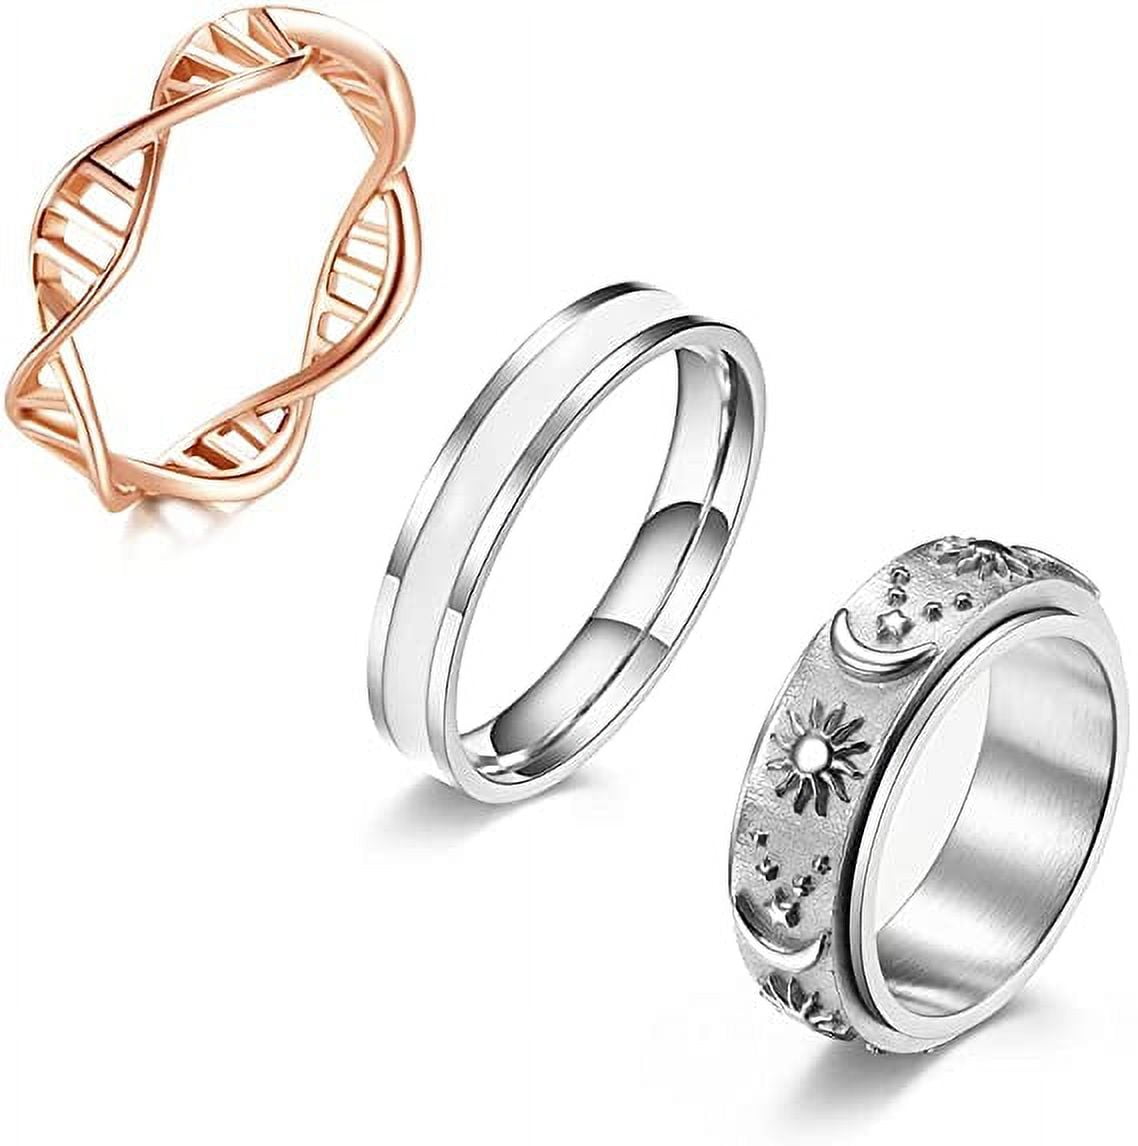 3 Pcs Stainless Steel Rings for Women Girls Celtic Rose Gold Wishbone  Chevron Ring Silver Cubic Zirconia Ring Set Size 6-9